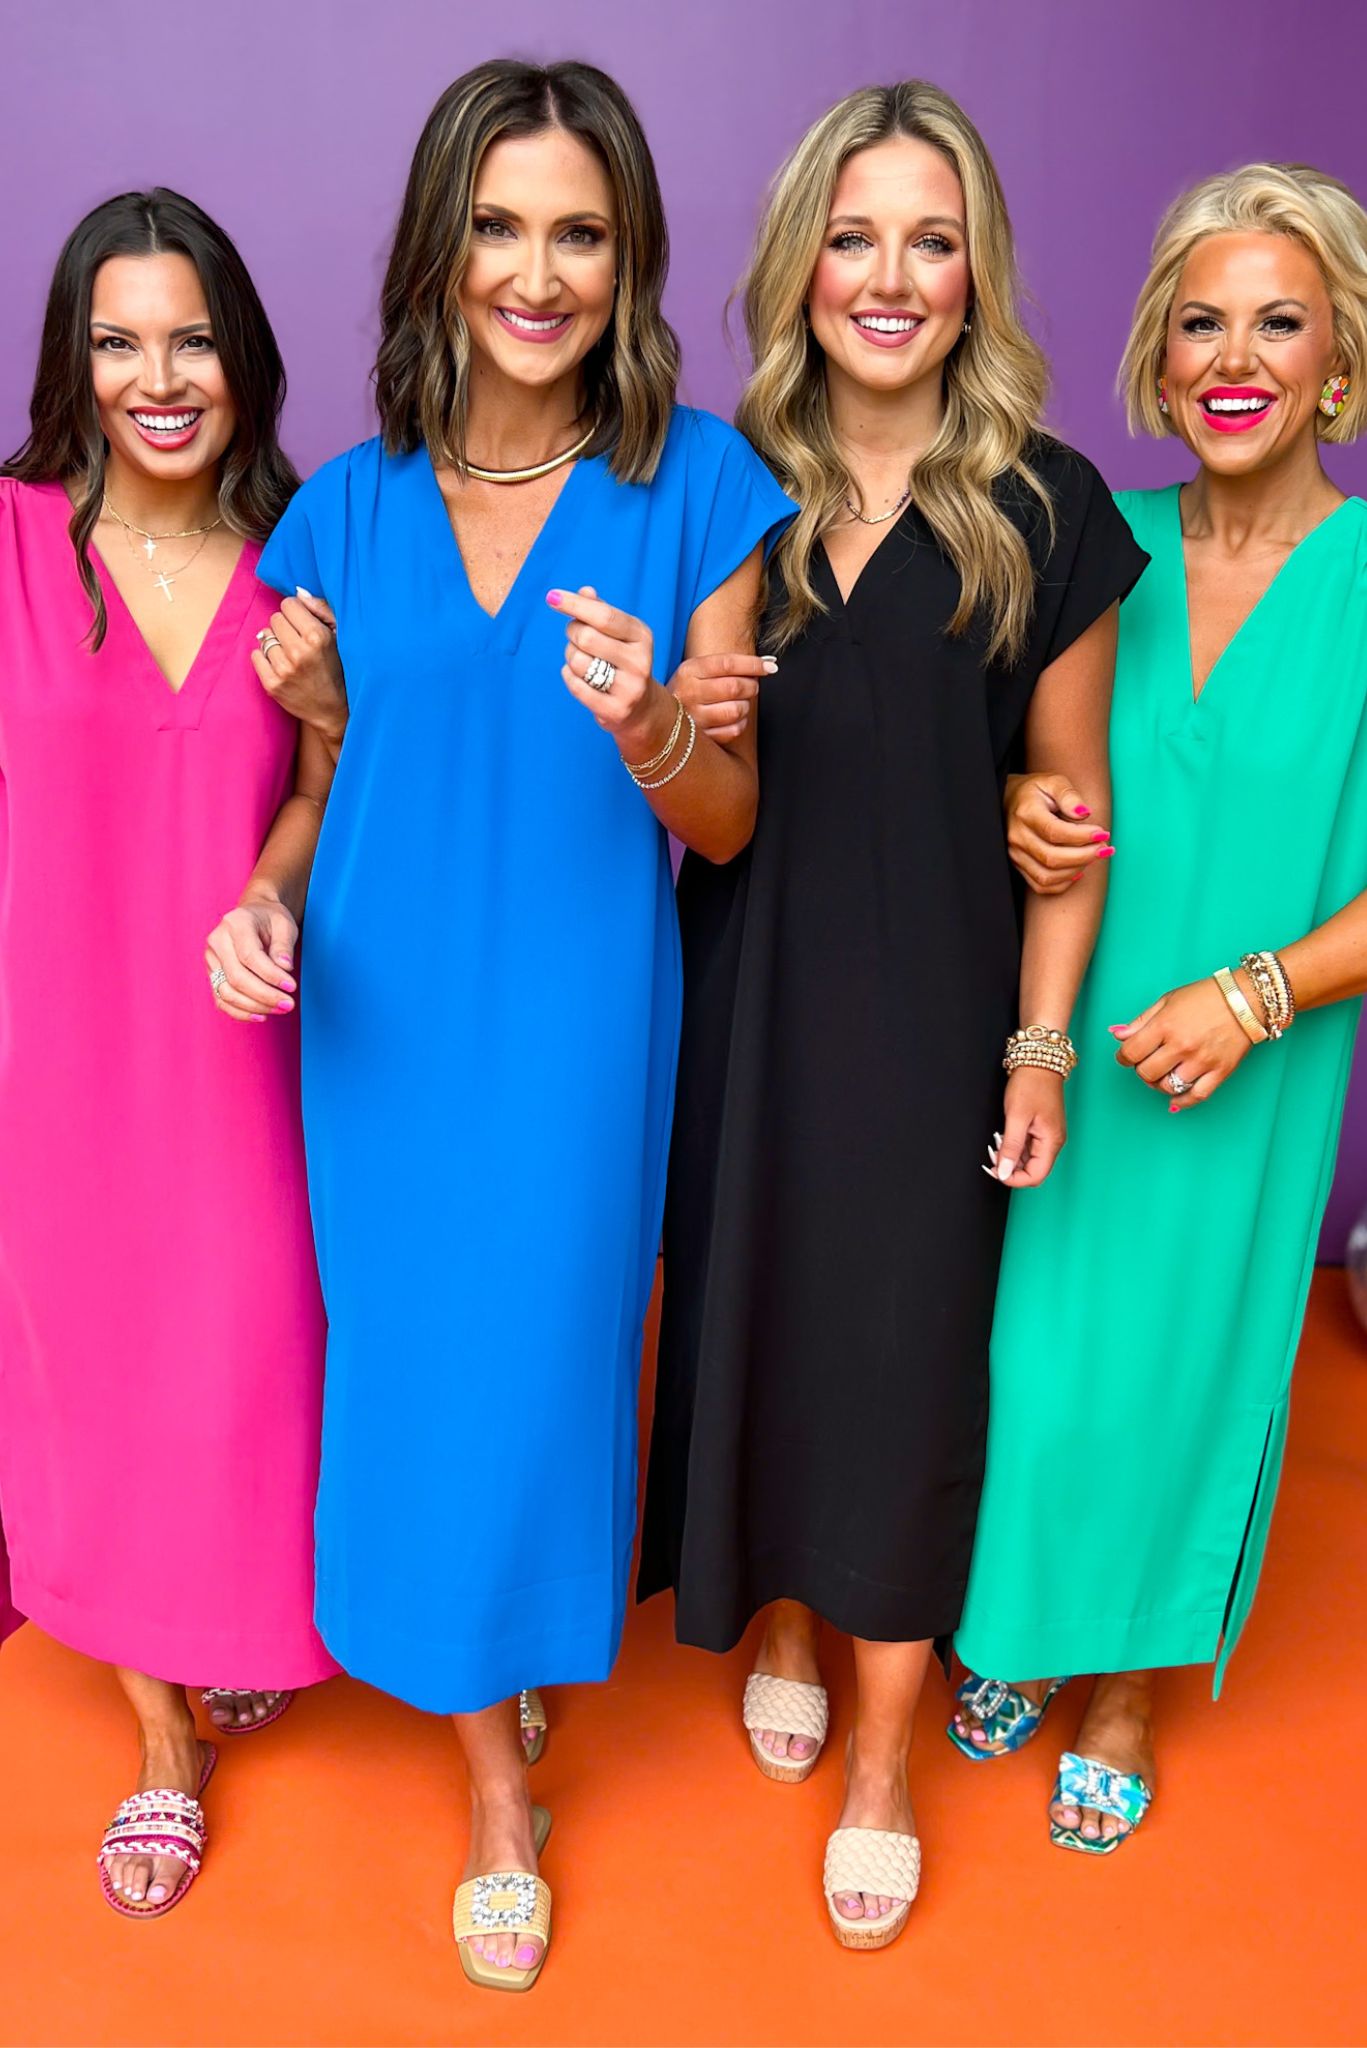 SSYS The Iris Maxi Dress In Berry, ssys the label, the iris dress, ssys dress, elevated dress, must have dress, maxi dress, everyday dress, summer dress, summer style, shop style your senses by Mallory Fitzsimmons, ssys by Mallory Fitzsimmons  Edit alt text